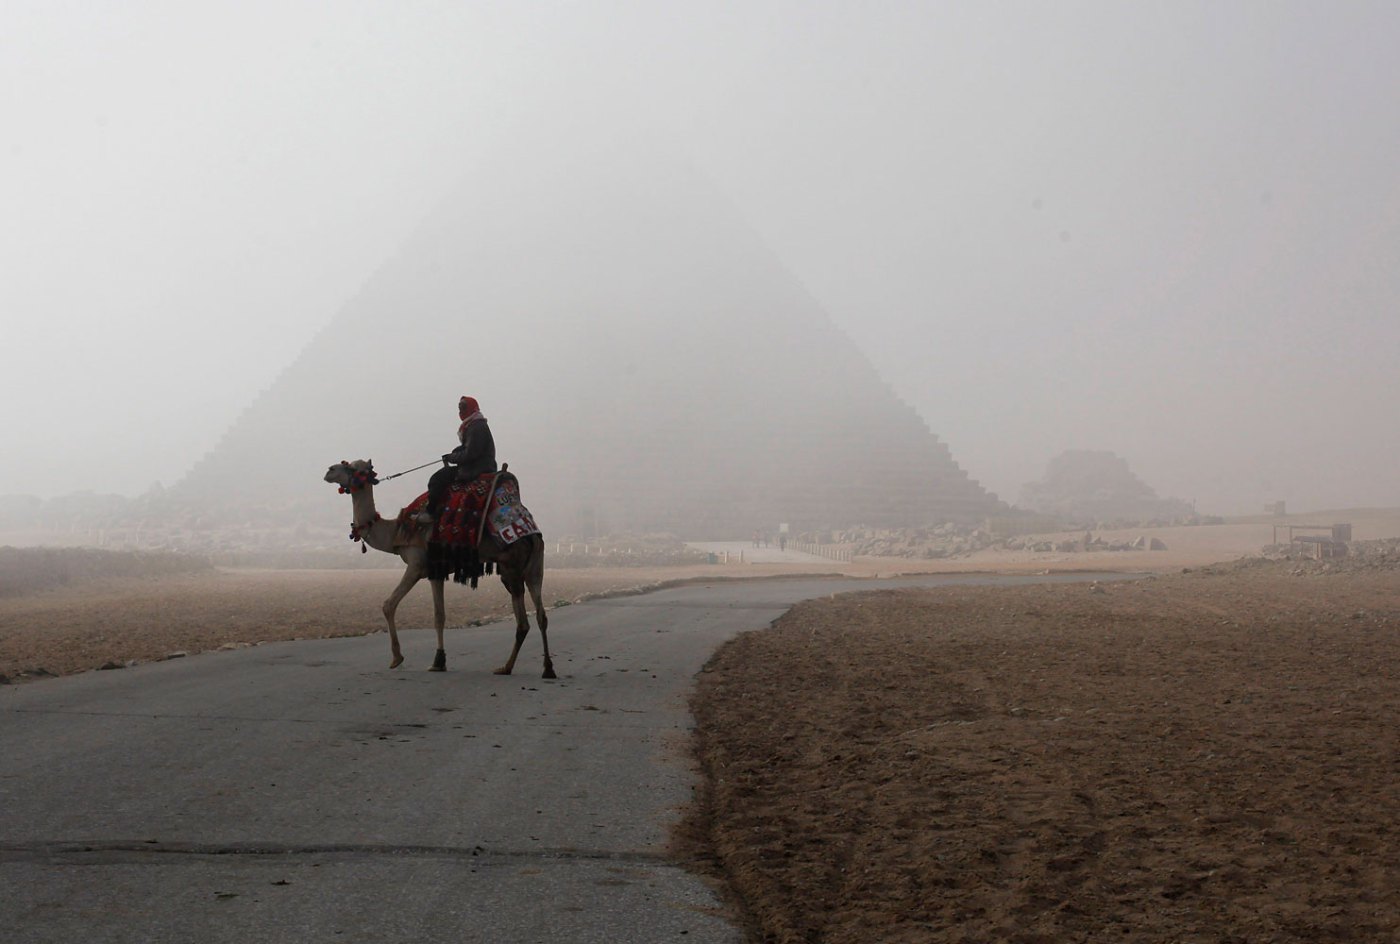 A man rides his camel as he waits for tourists at the Giza pyramids area, south of Cairo, Feb. 20, 2014. (Asmaa Waguih&mdash;Reuters)